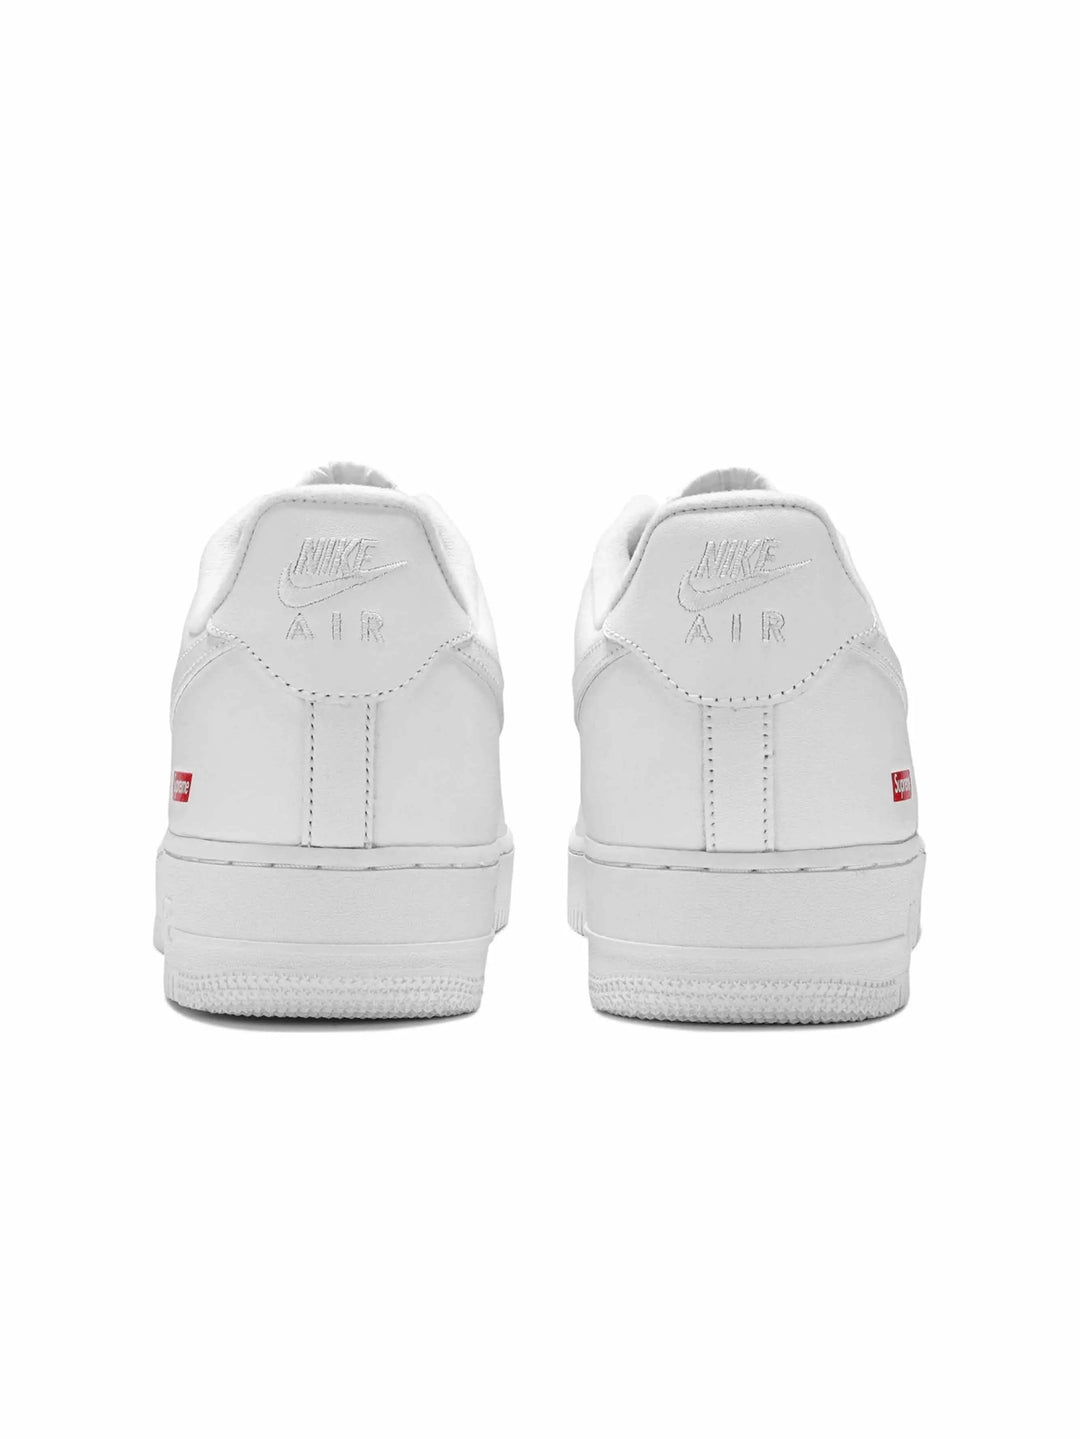 Nike Air Force 1 Low Supreme White (FACTORY FLAW) in Auckland, New Zealand - Shop name